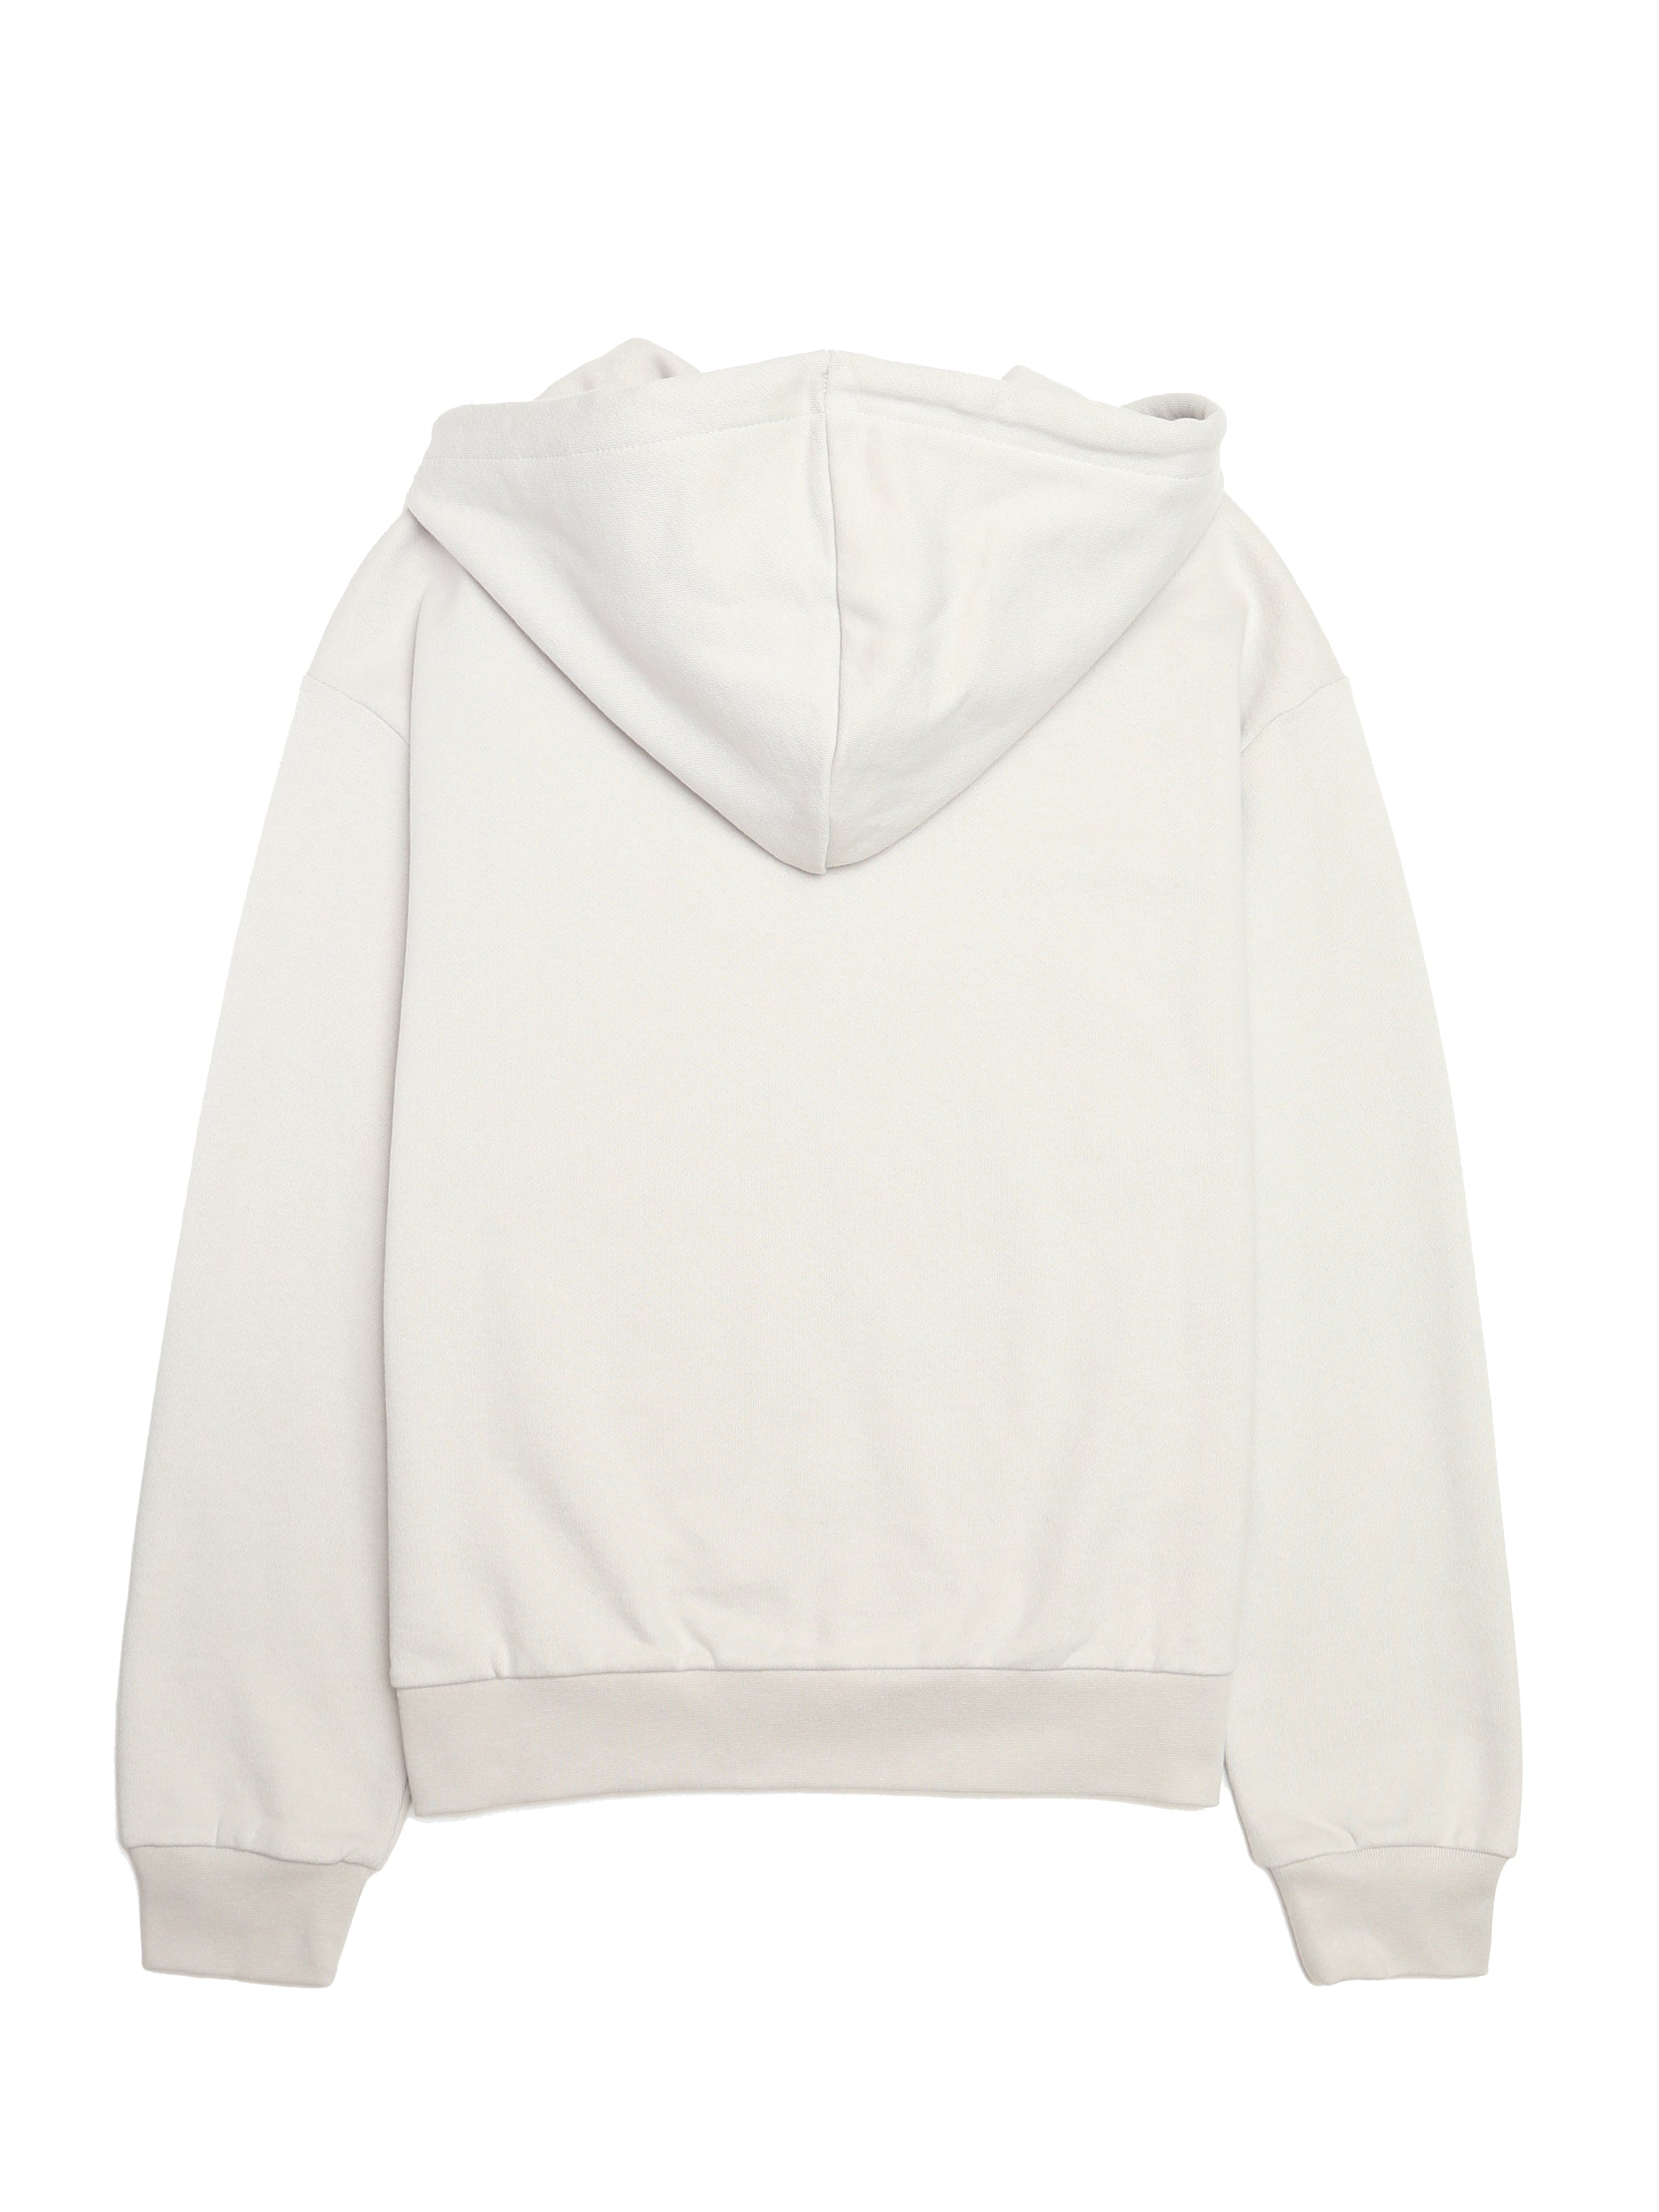 Cethrio Womens Oversized Hoodies and Sweatshirt V Neck Button Up